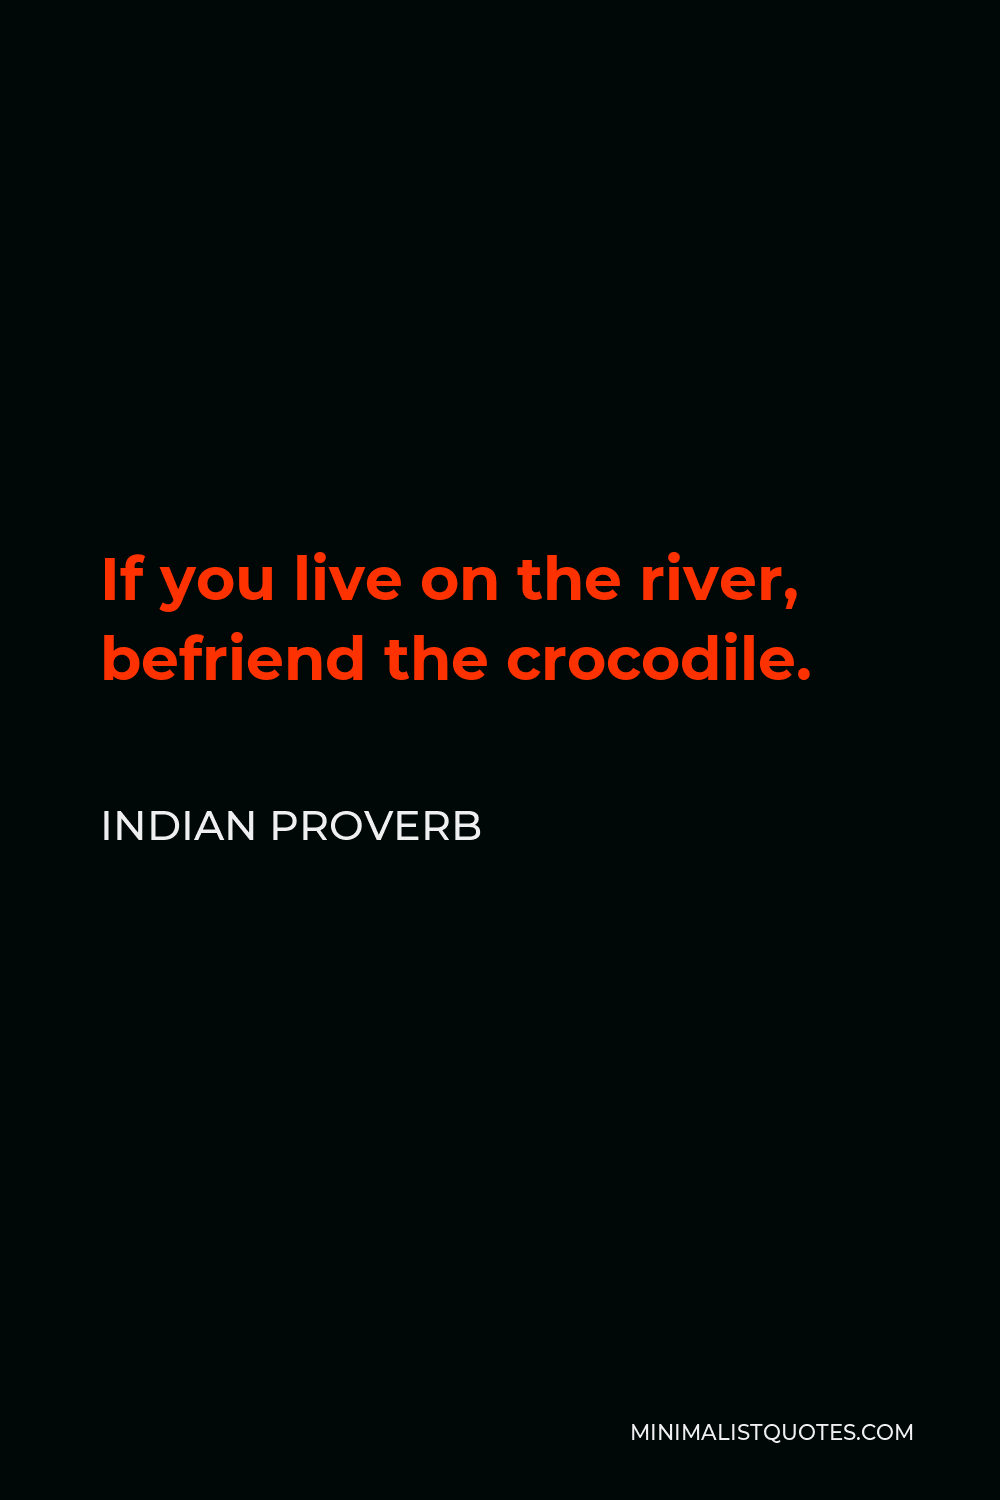 Indian Proverb Quote - If you live on the river, befriend the crocodile.